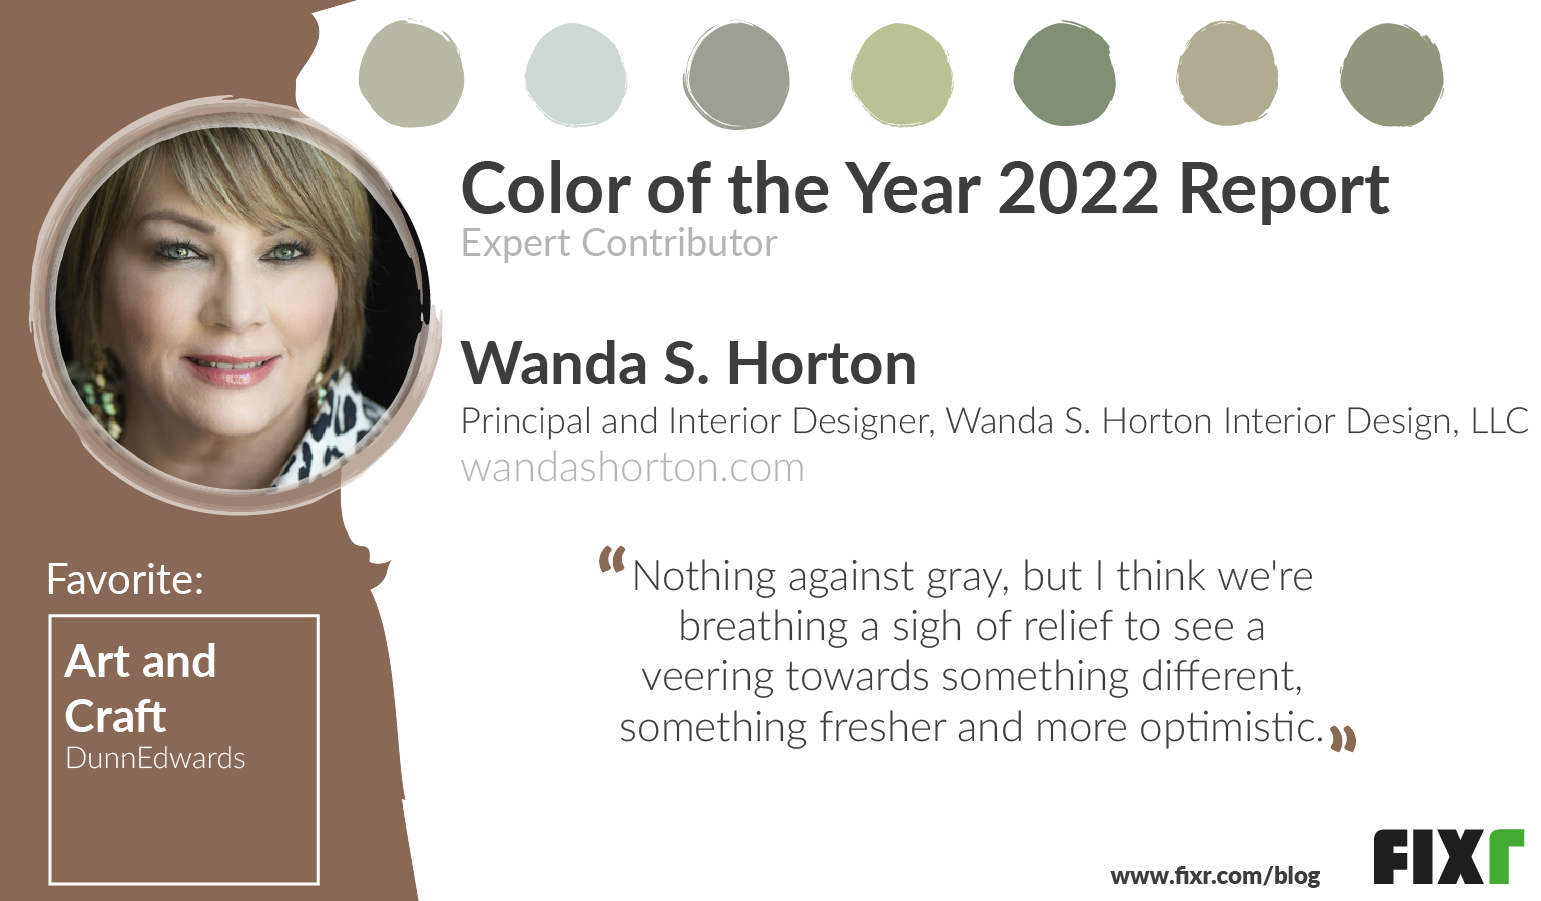 Fixr-Color-of-the-Year-2022--expert-card_Wanda-S.Horton.png